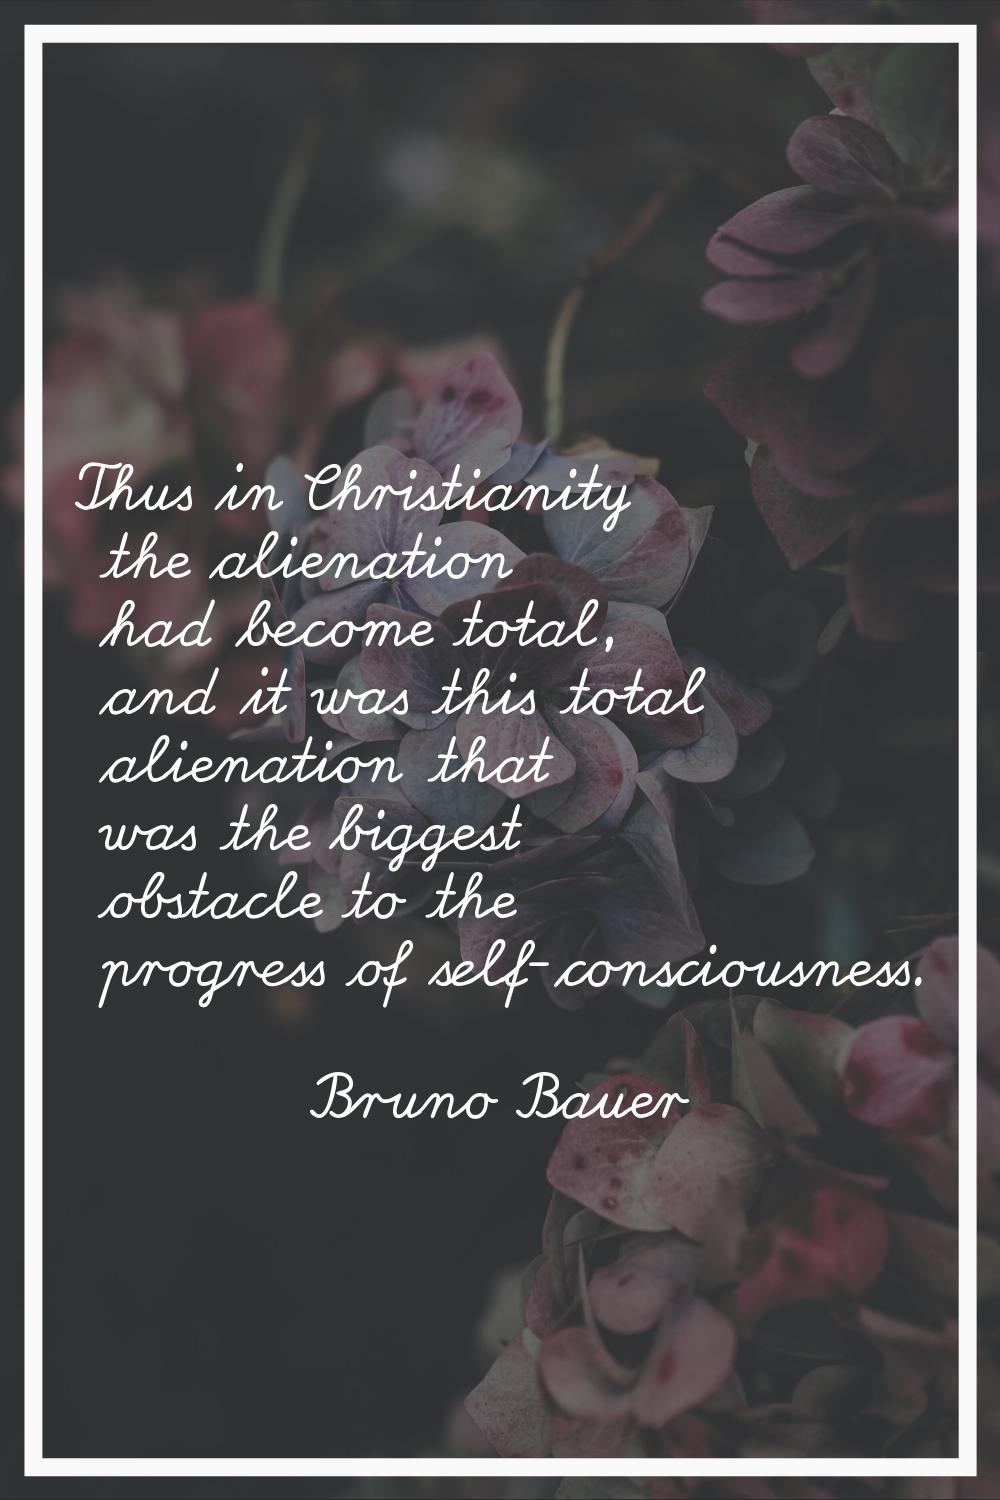 Thus in Christianity the alienation had become total, and it was this total alienation that was the